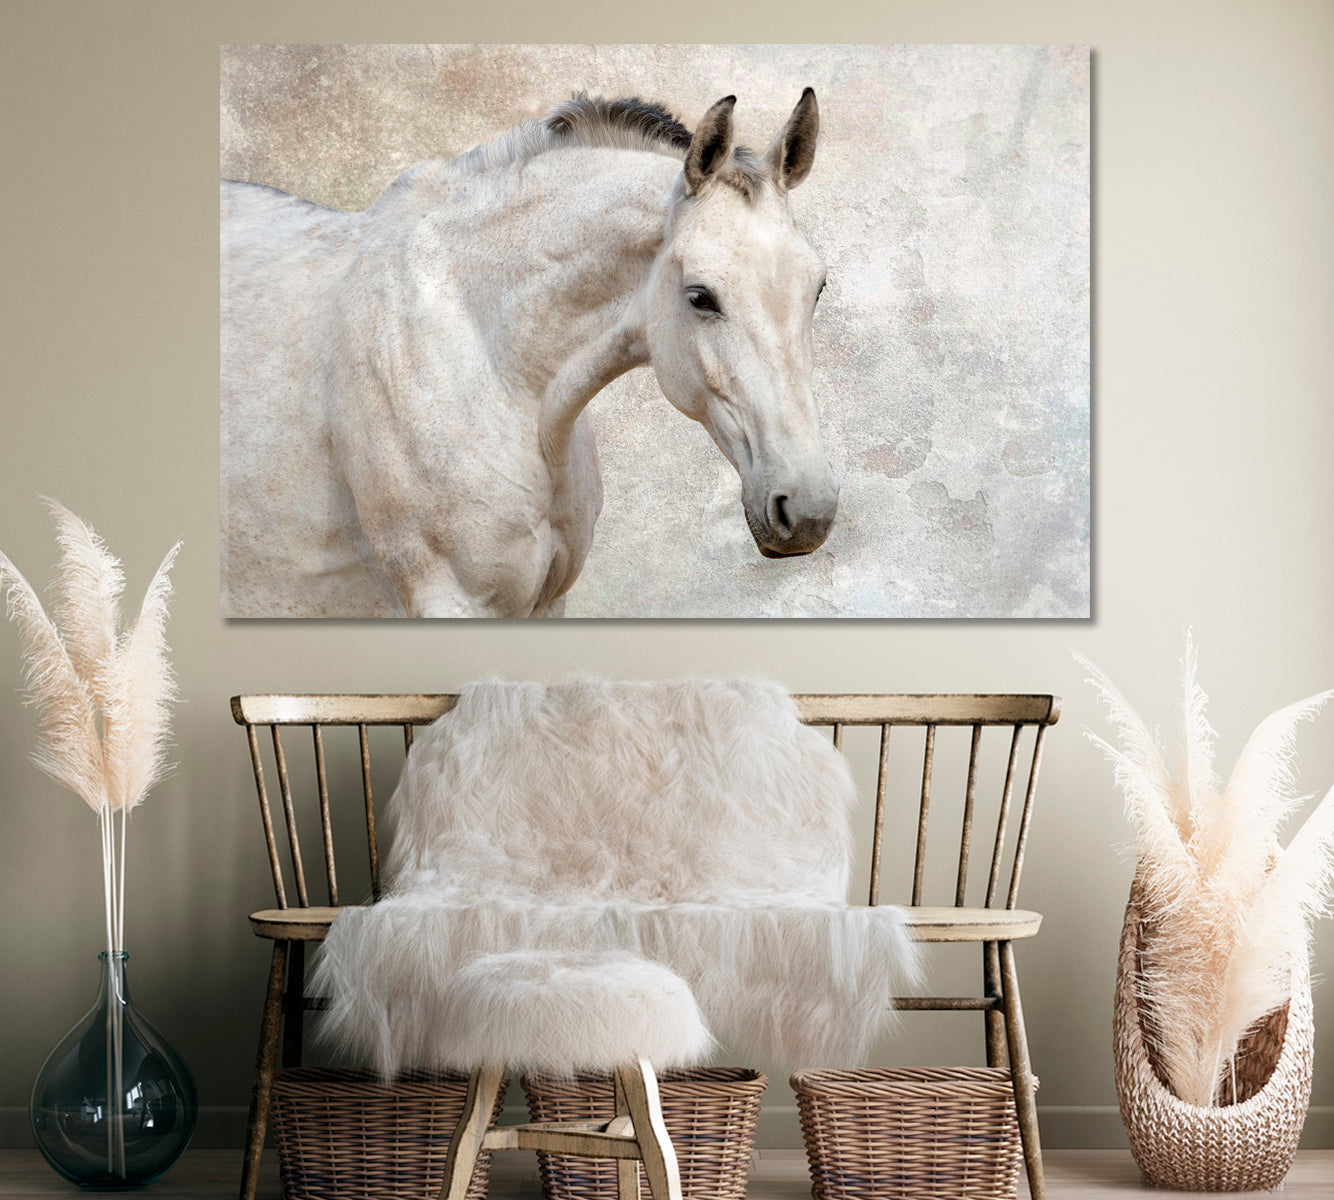 Beautiful White Horse Canvas Print ArtLexy 1 Panel 24"x16" inches 